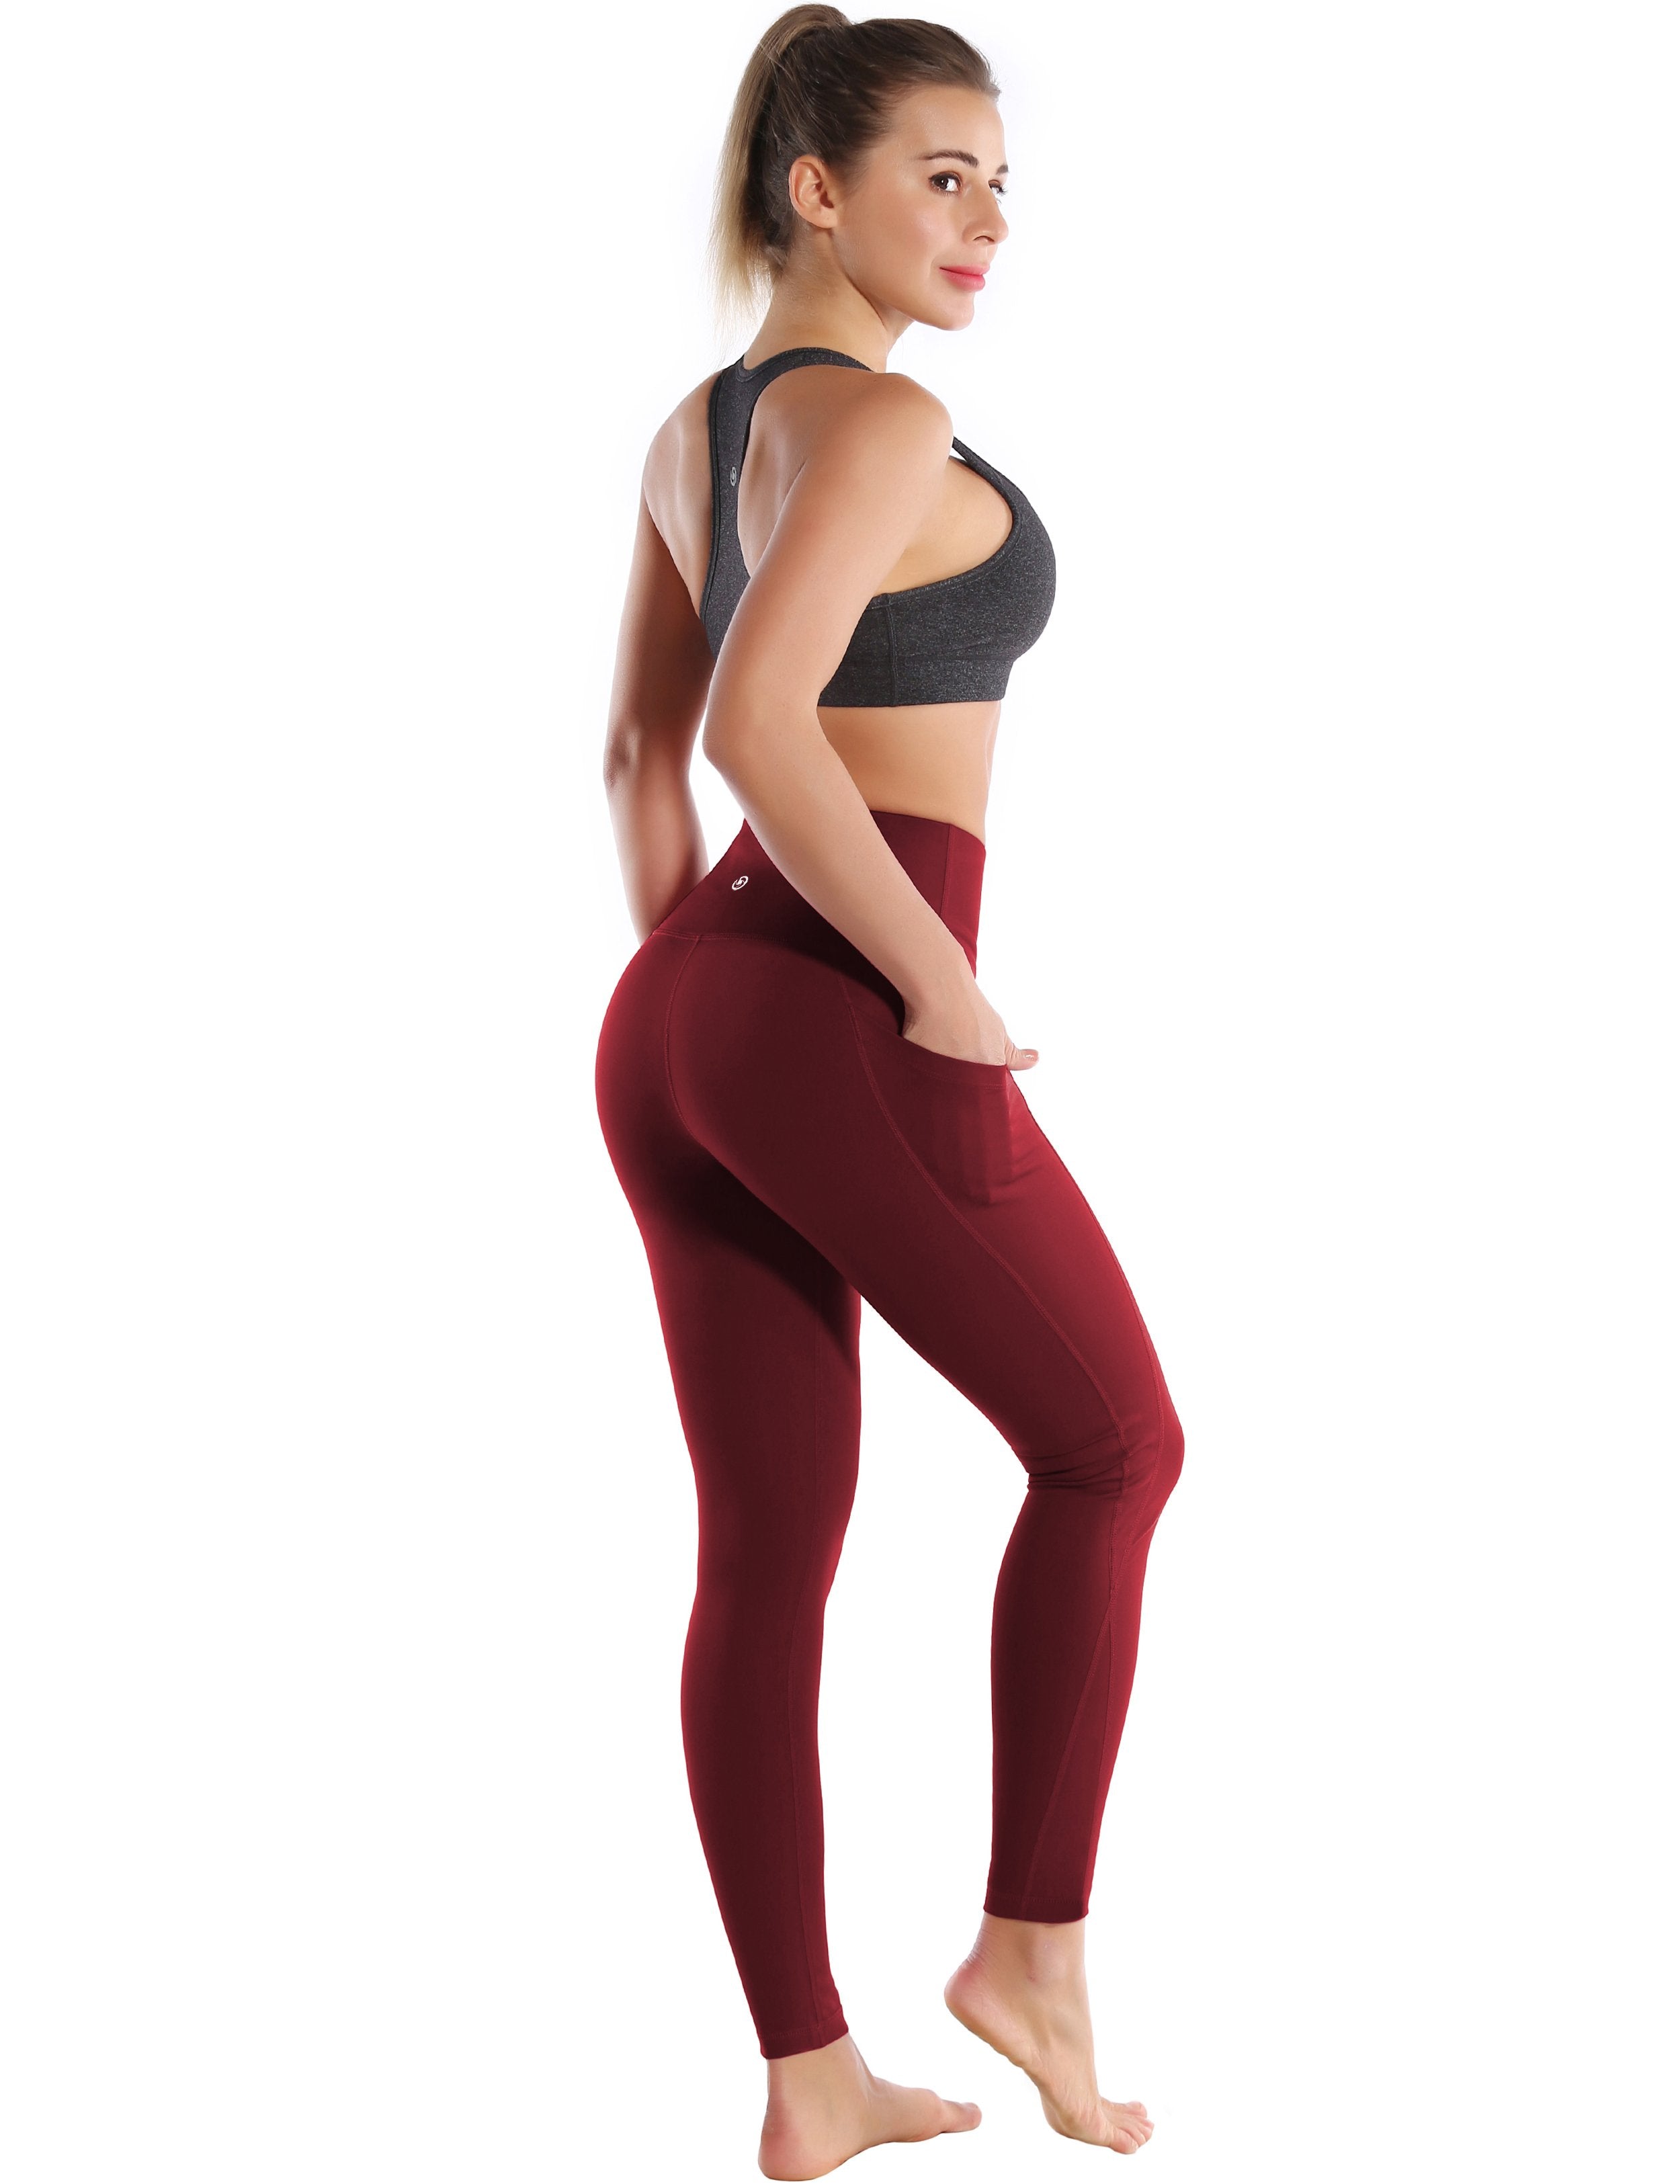 High Waist Side Pockets Pilates Pants cherryred 75% Nylon, 25% Spandex Fabric doesn't attract lint easily 4-way stretch No see-through Moisture-wicking Tummy control Inner pocket